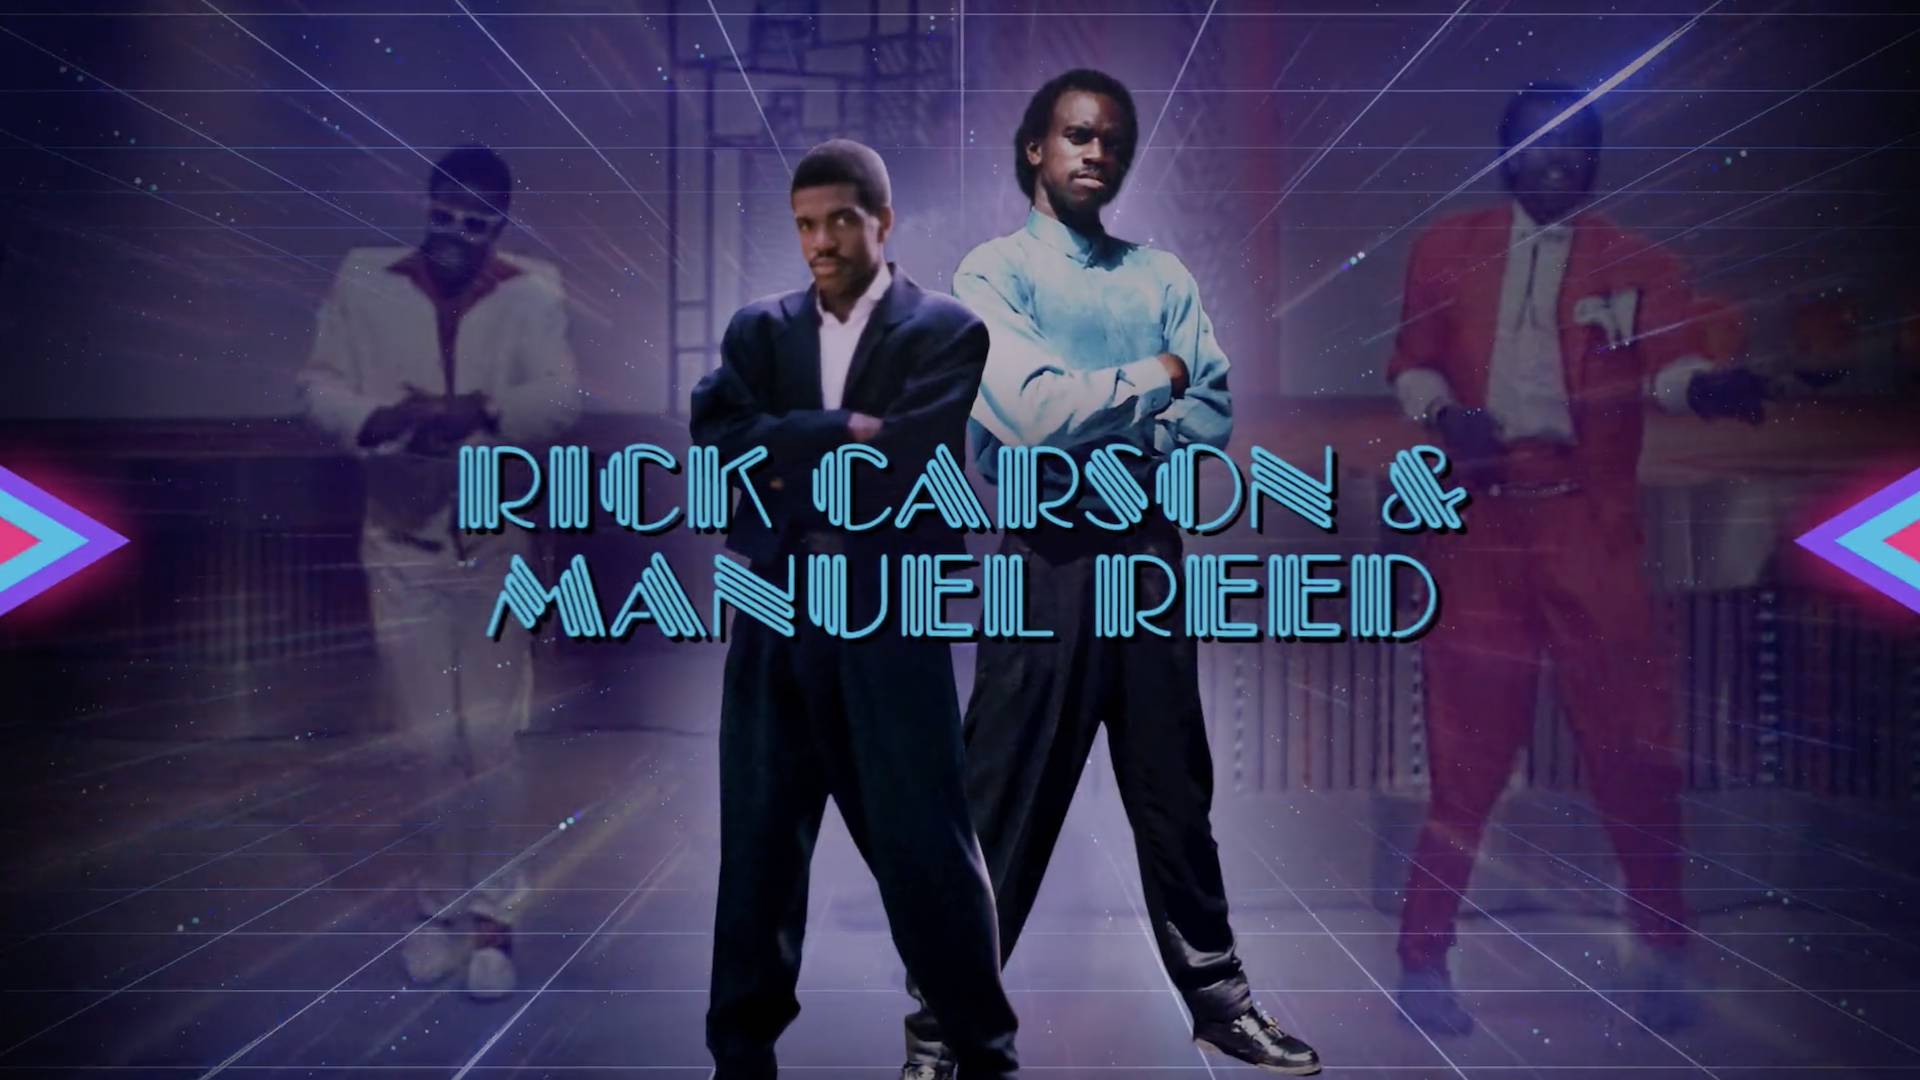 Pictured: Soul Train Dancer Rick Carson and Manuel Reed